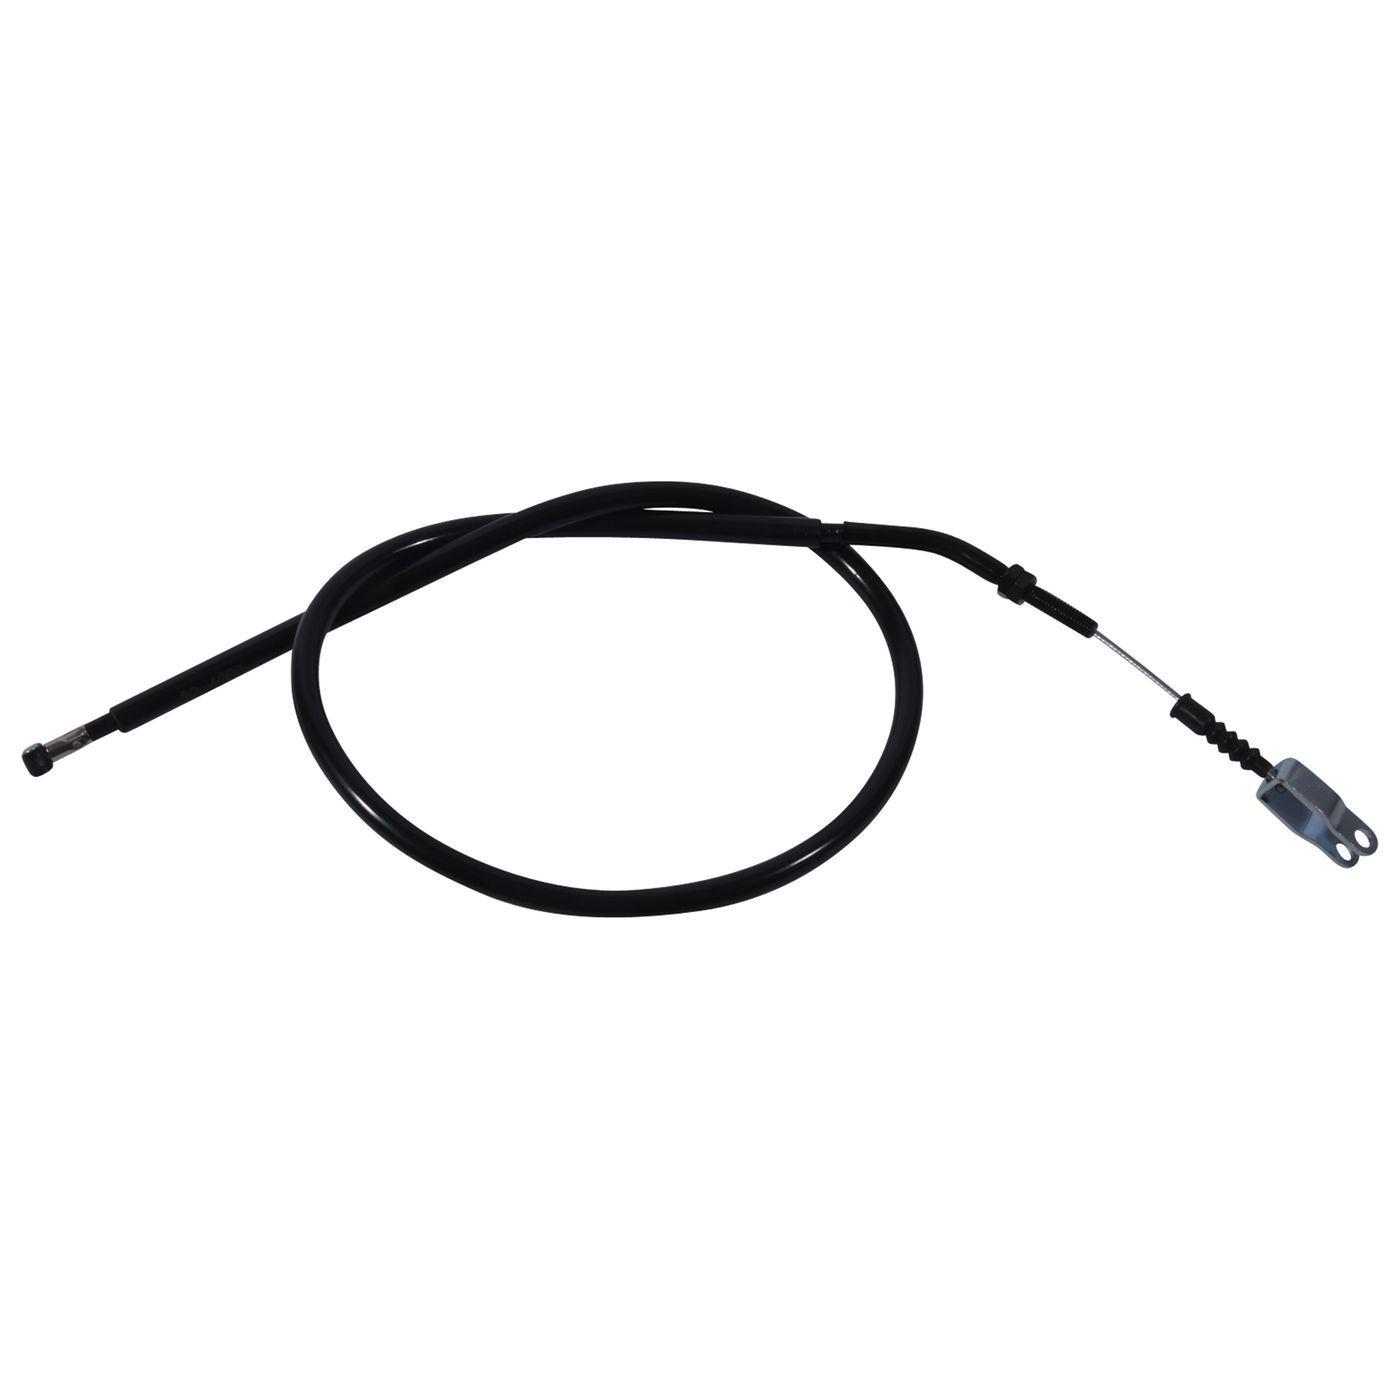 Wrp Brake Cables - WRP454067 image